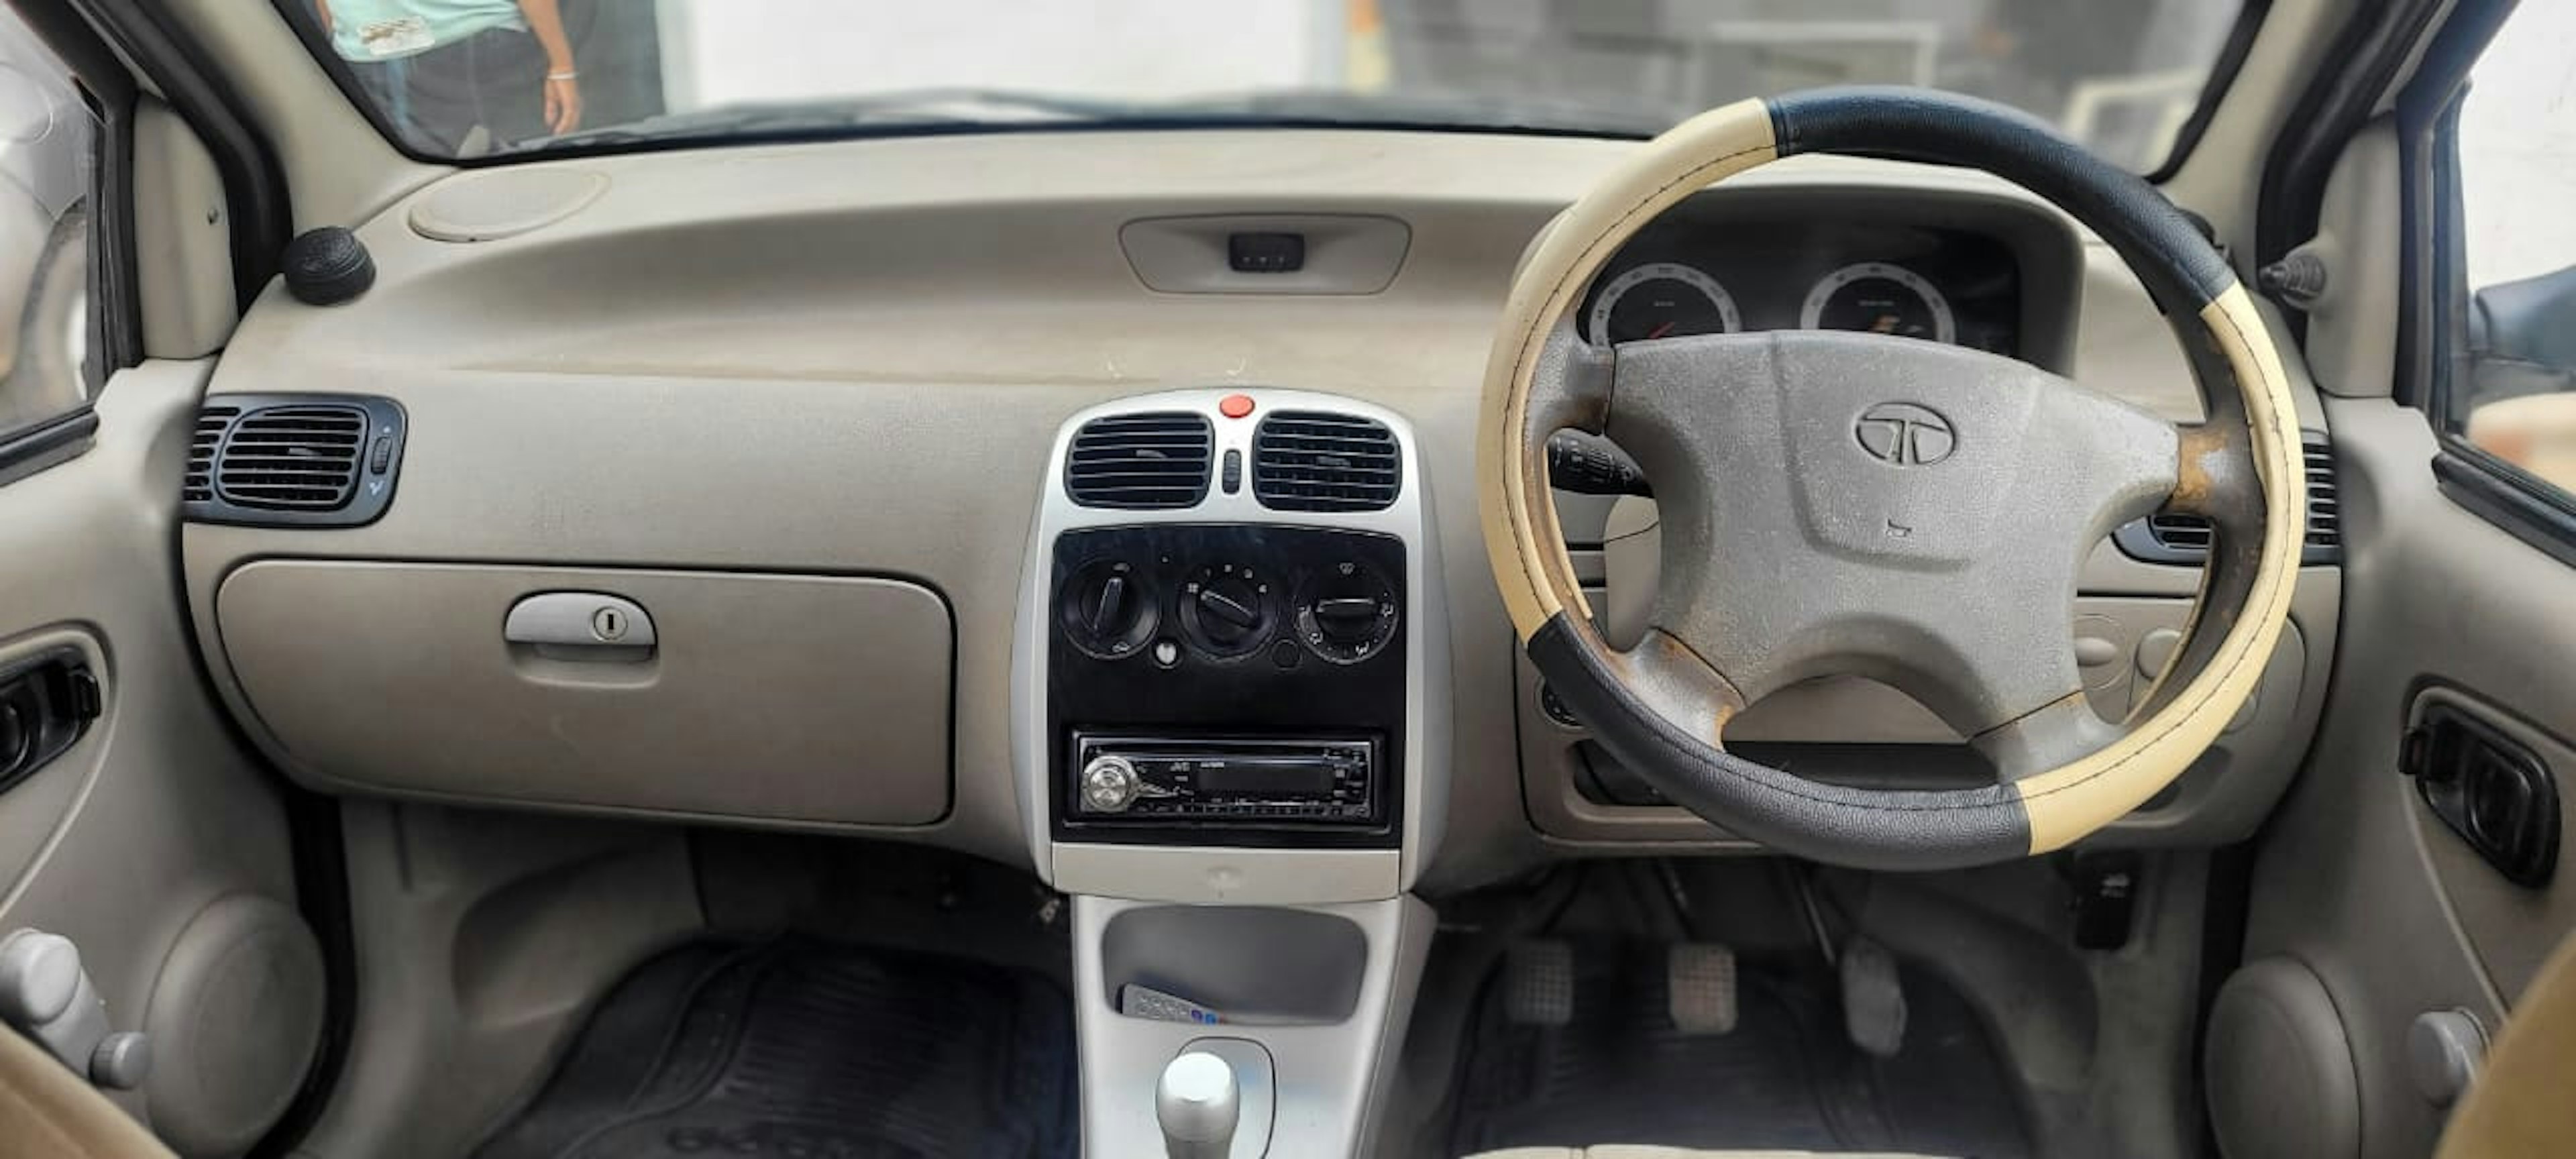 View - Tata Indica photos, Tata Indica available in Ahmedabad, make deal in 85000